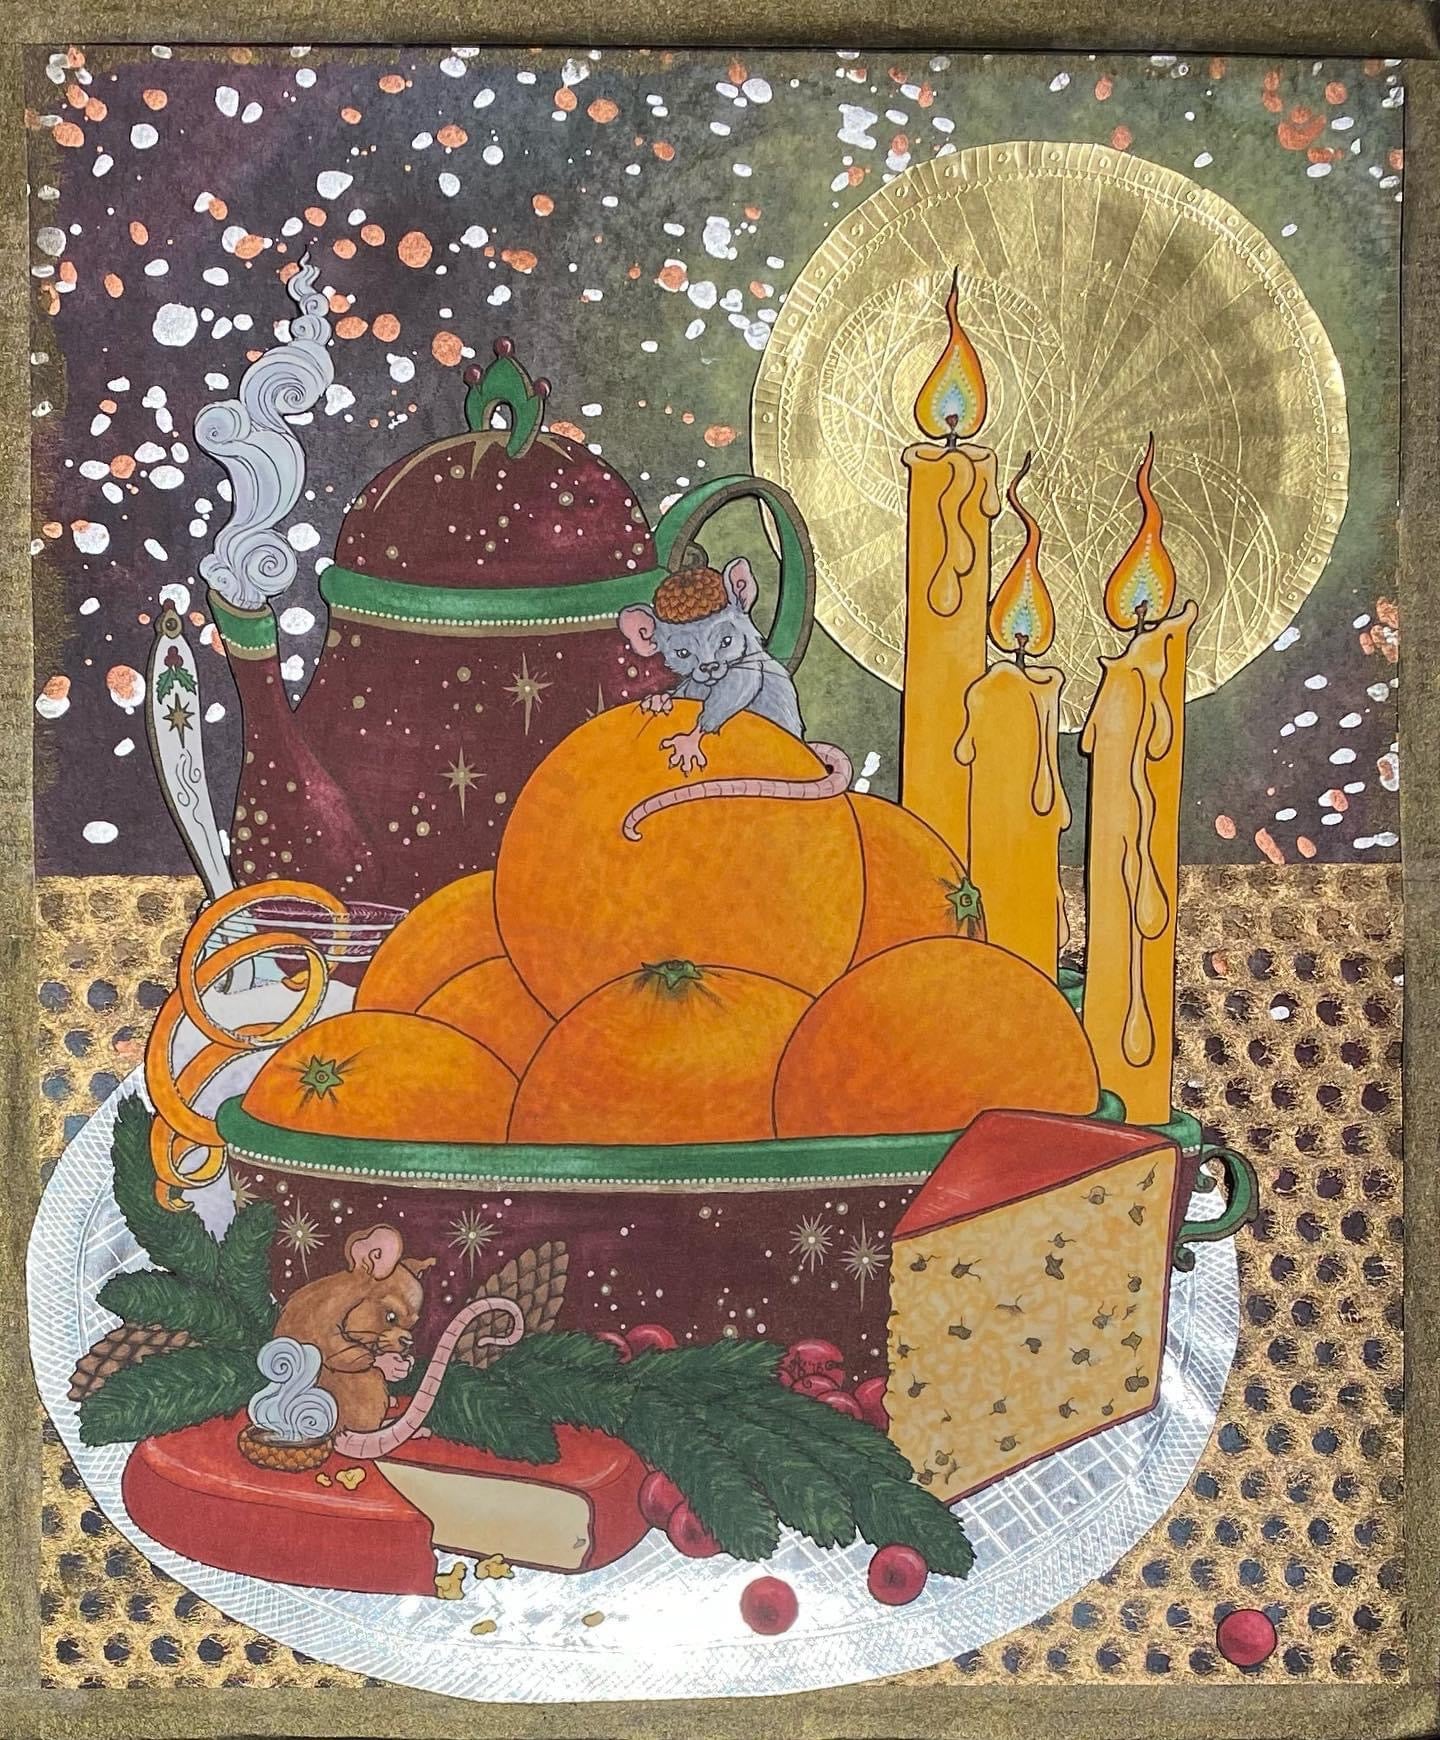 A spread from a tea party including a red tea pot, yellow candles, a bowl of oranges and some cheese adorned a foil table top.  Two mice have helped themselves to the bounty, one rests atop the orange pile, and the other on a red wax round of cheese.